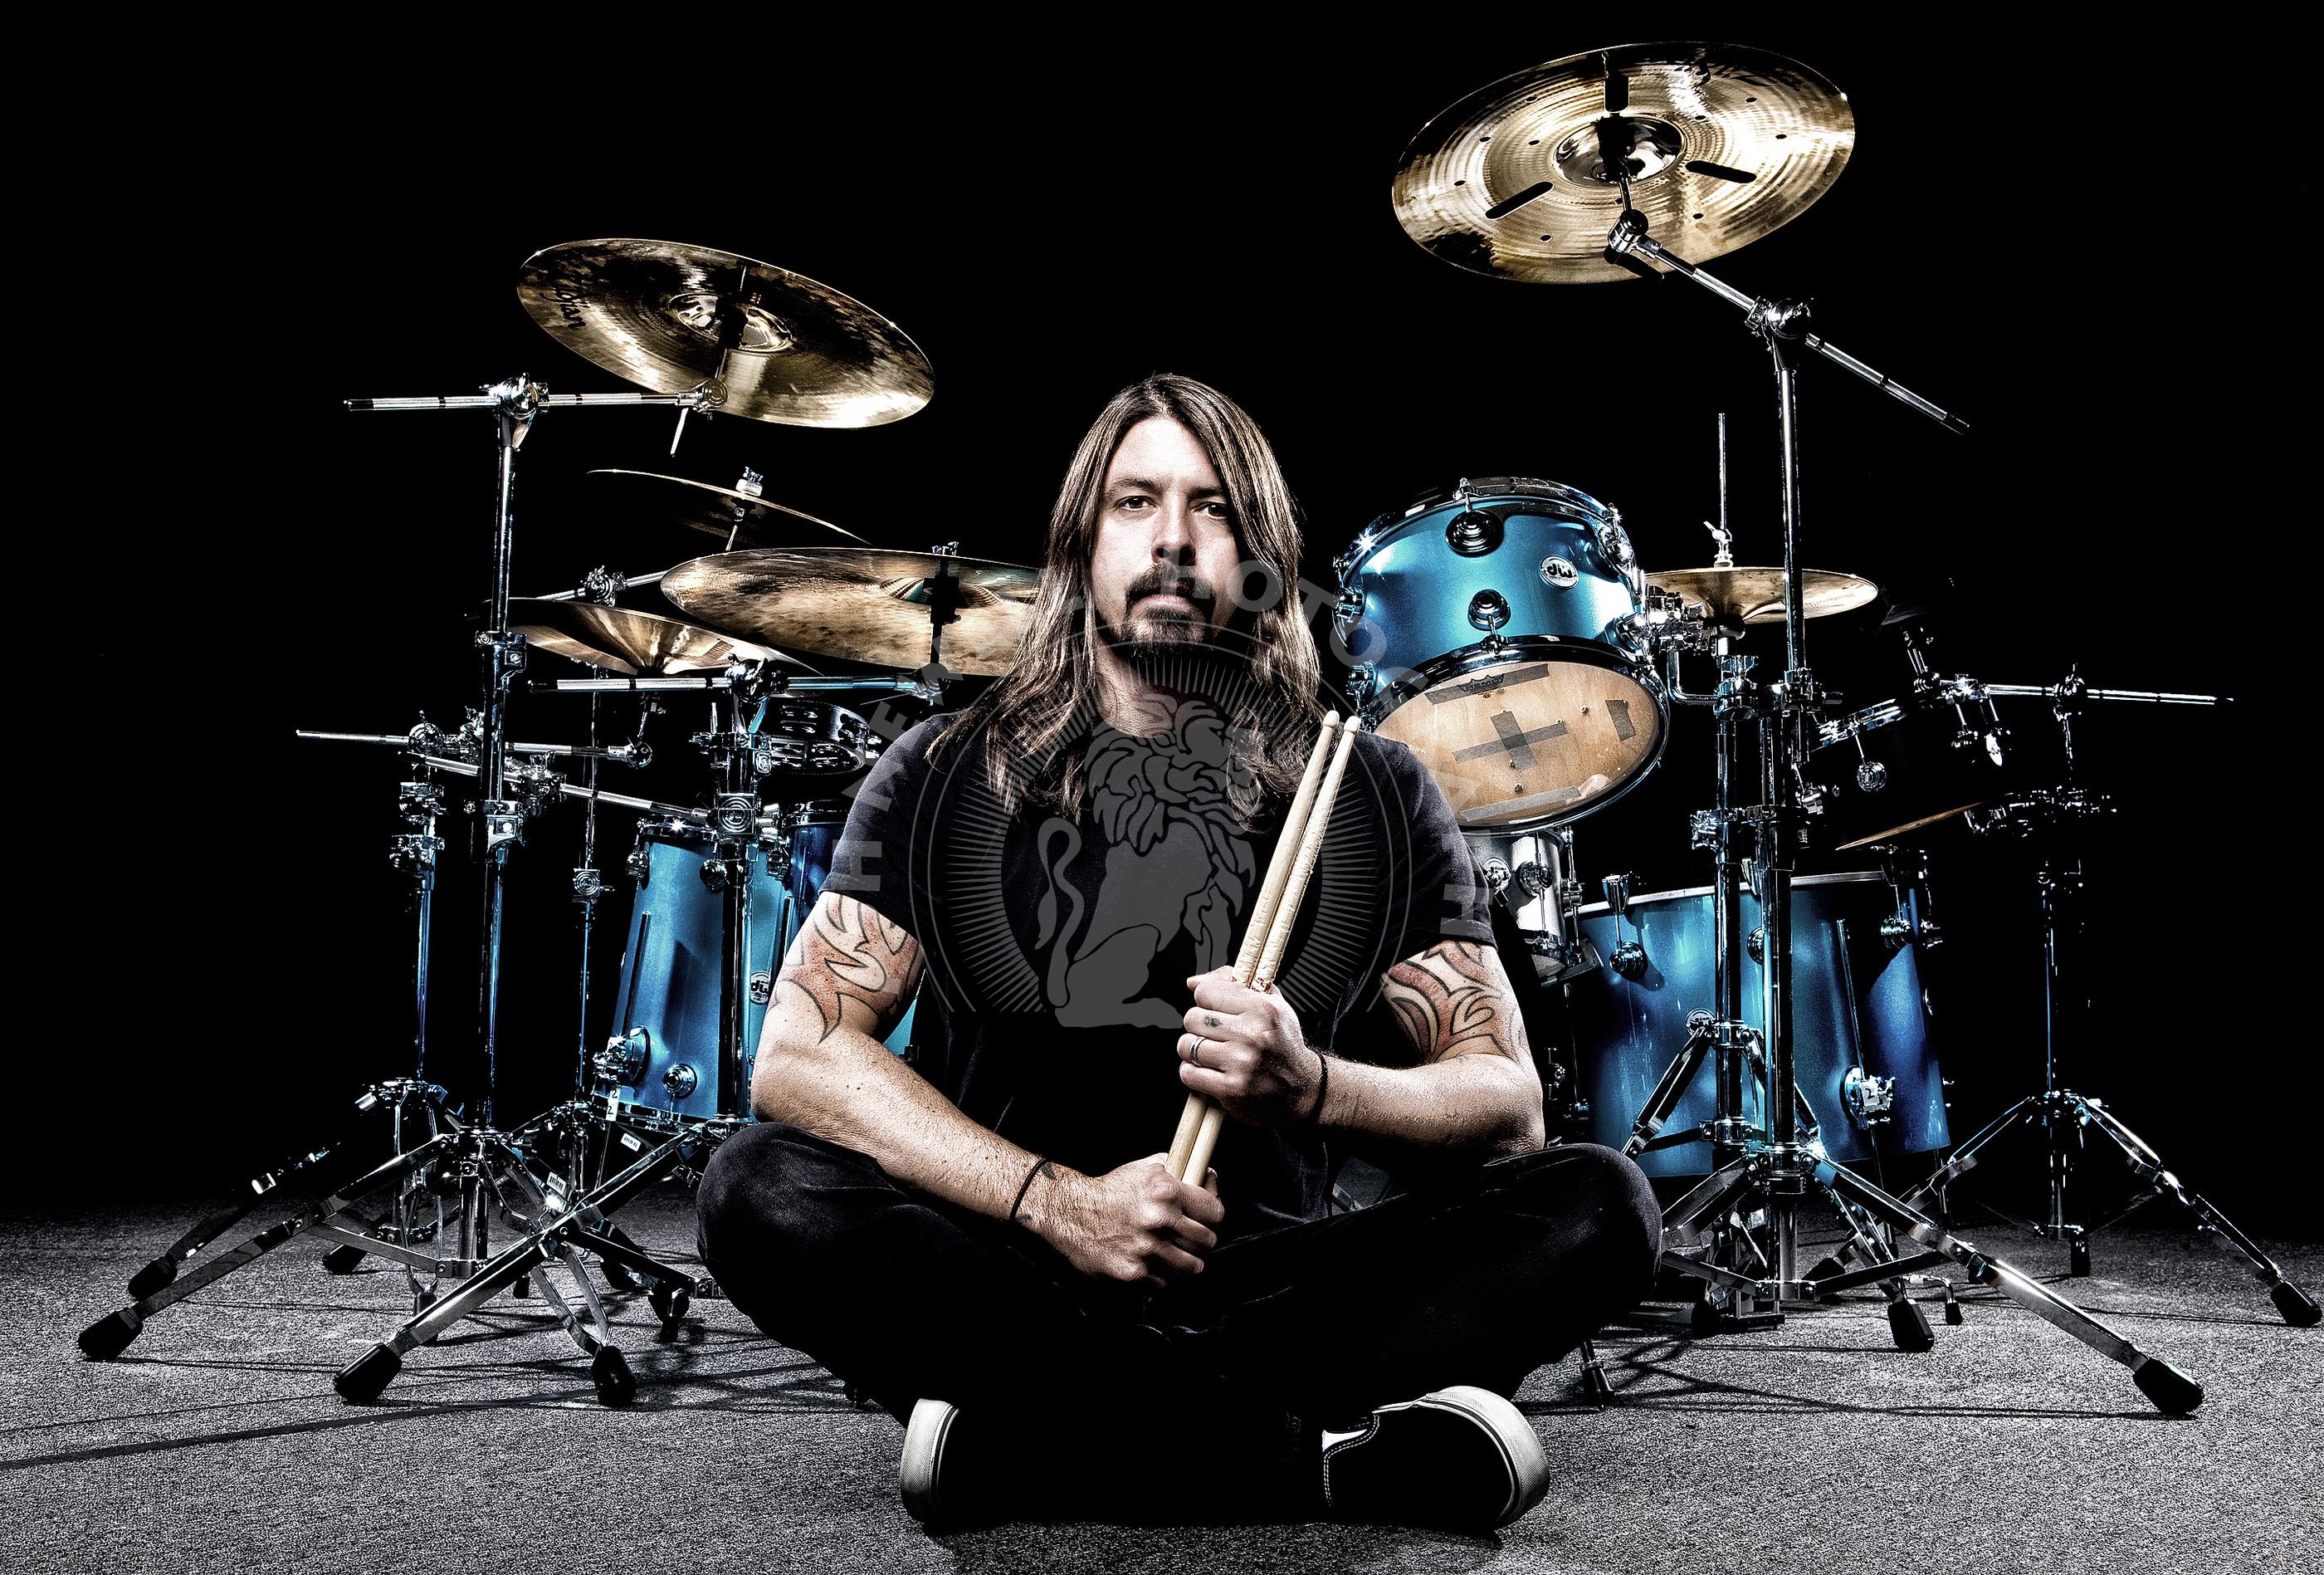 Wallpaper Dave Grohl, Foo Fighters, Drummer, Drum, Musician, Background -  Download Free Image